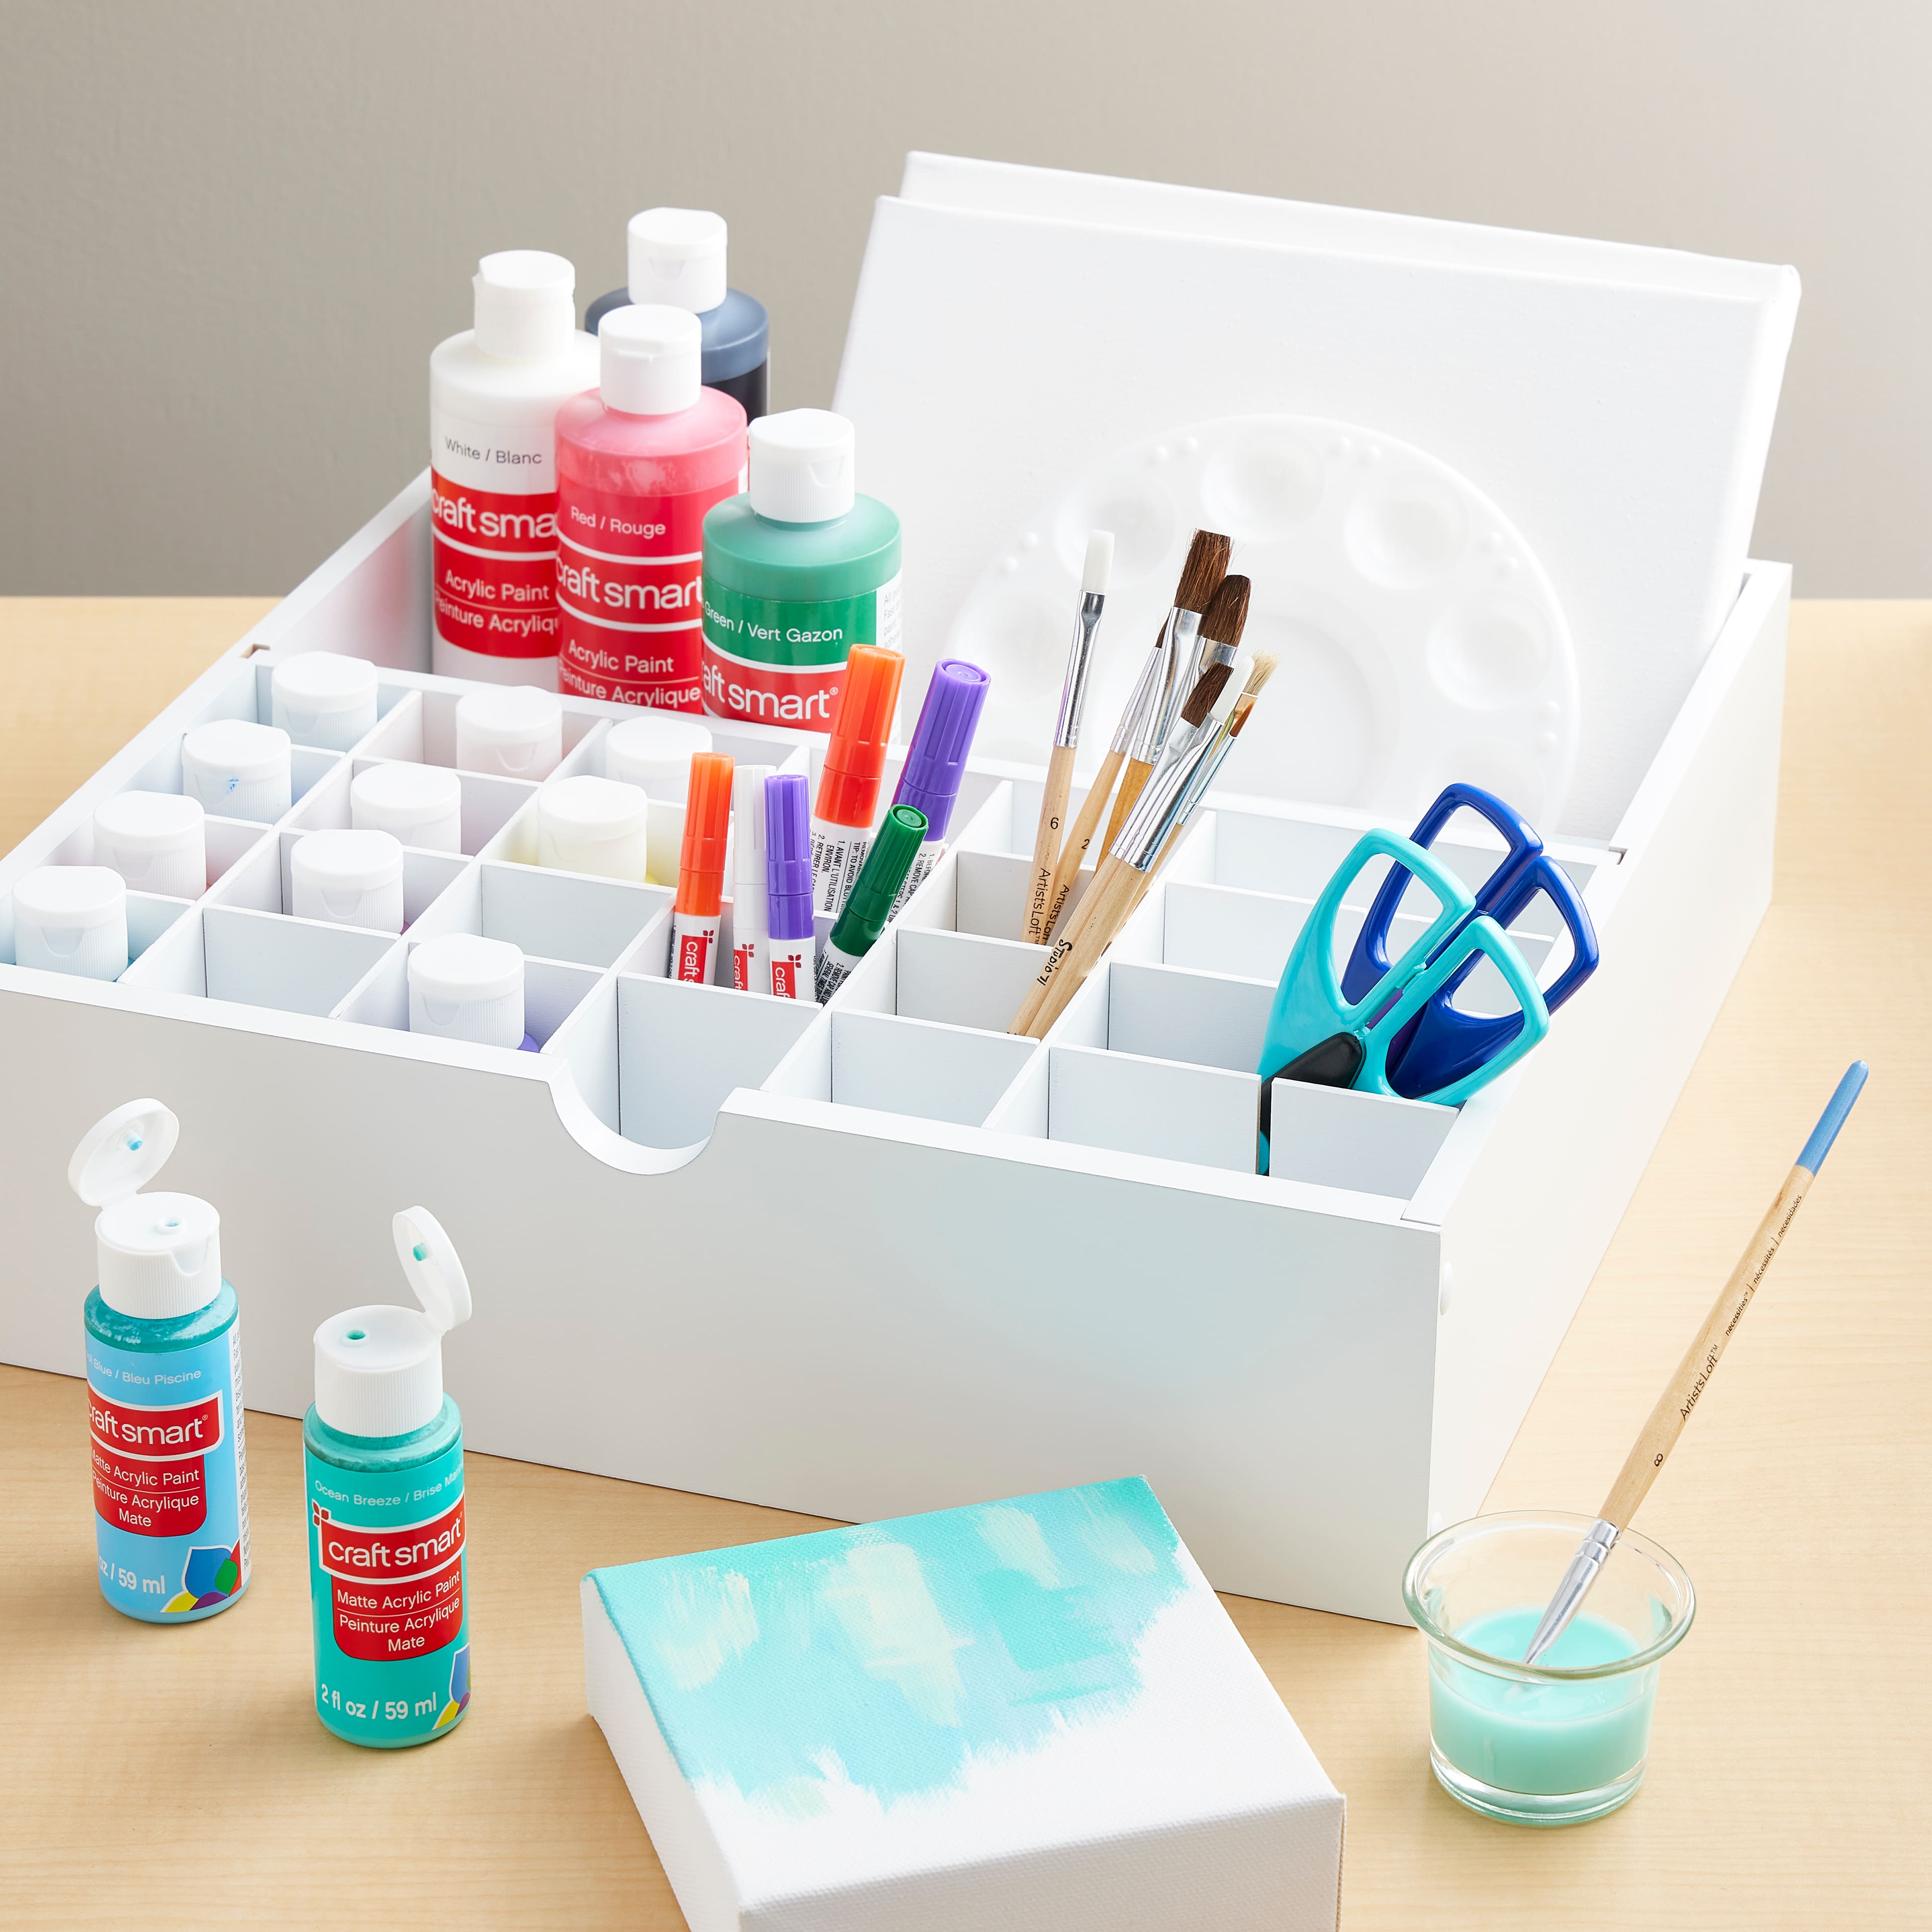 Simply Tidy Modular Storage from @Michaels Stores #ad offers tons of s